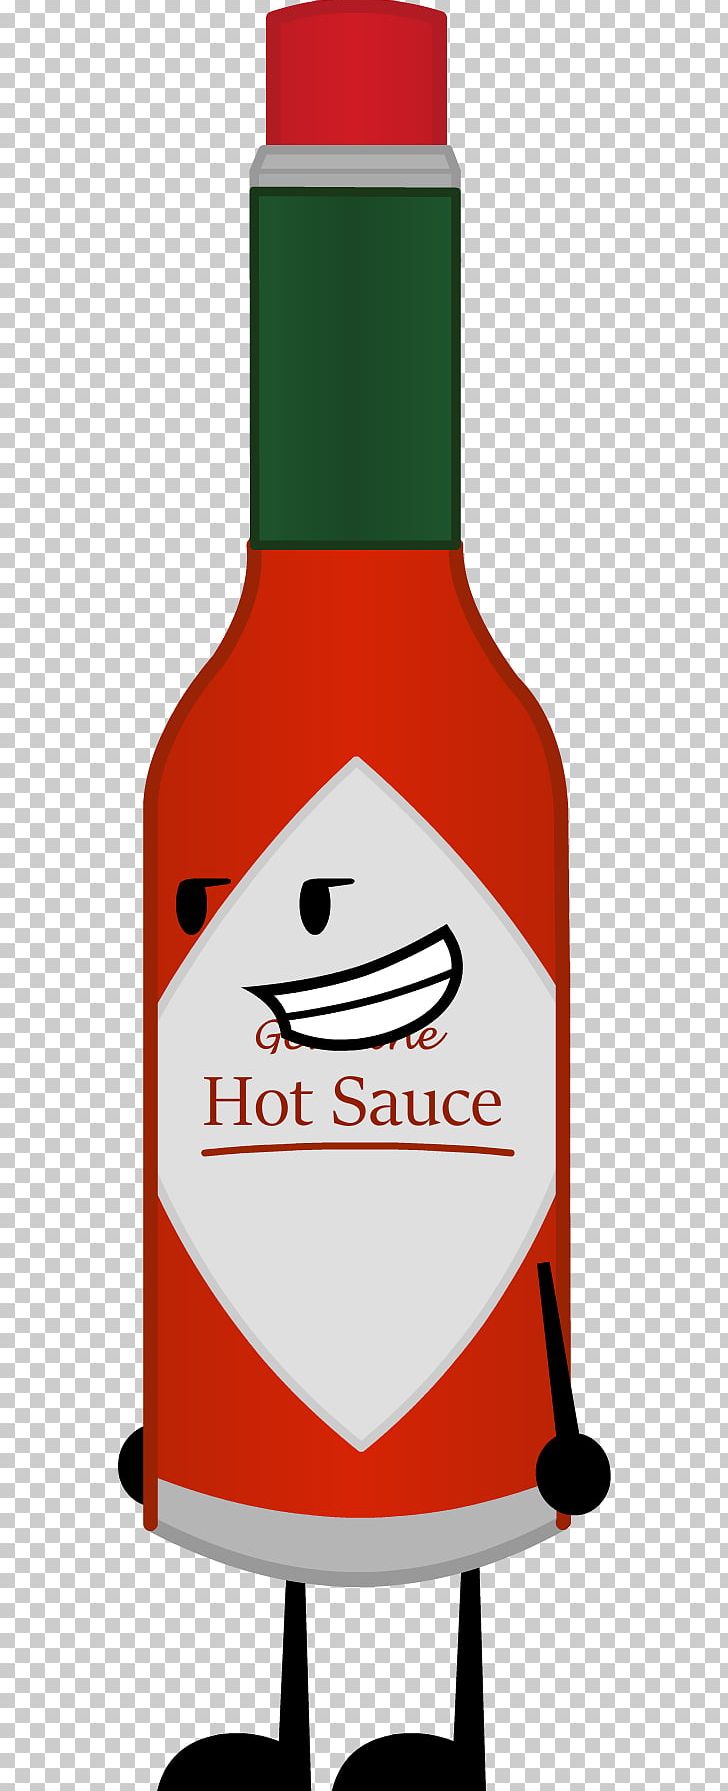 Hot Sauce Wikia Floating Up To Space PNG, Clipart, Banana, Basketball Ball, Battle, Bottle, Cartoon Free PNG Download